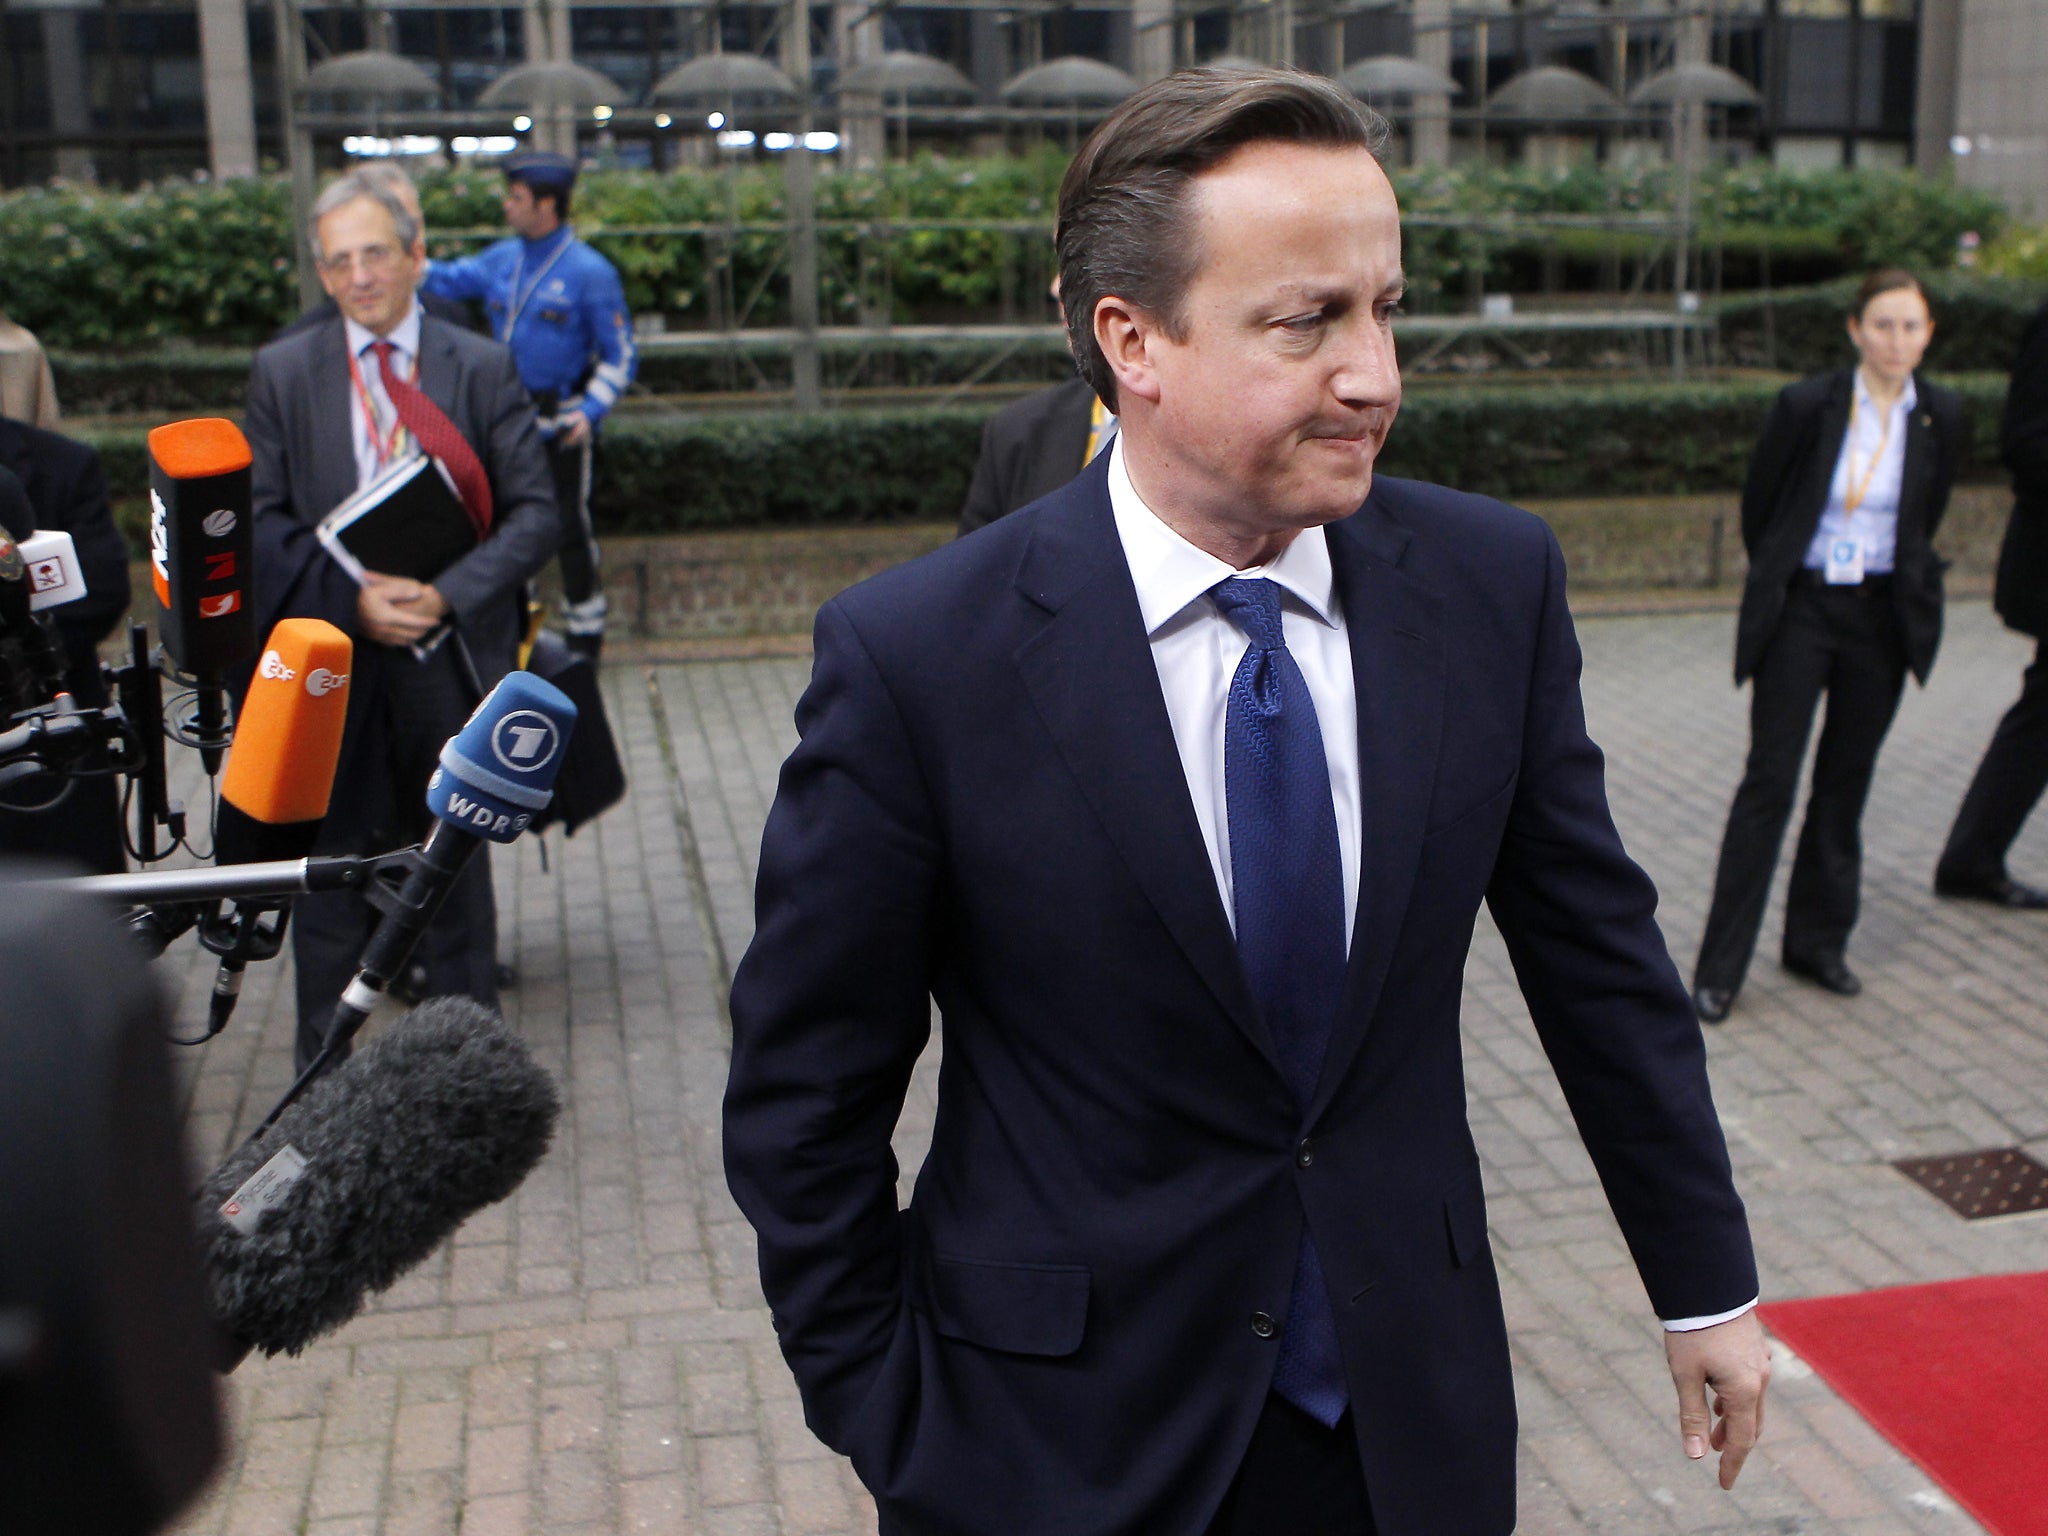 David Cameron had called for an extra €50bn of cuts in the spending programme for 2014-20